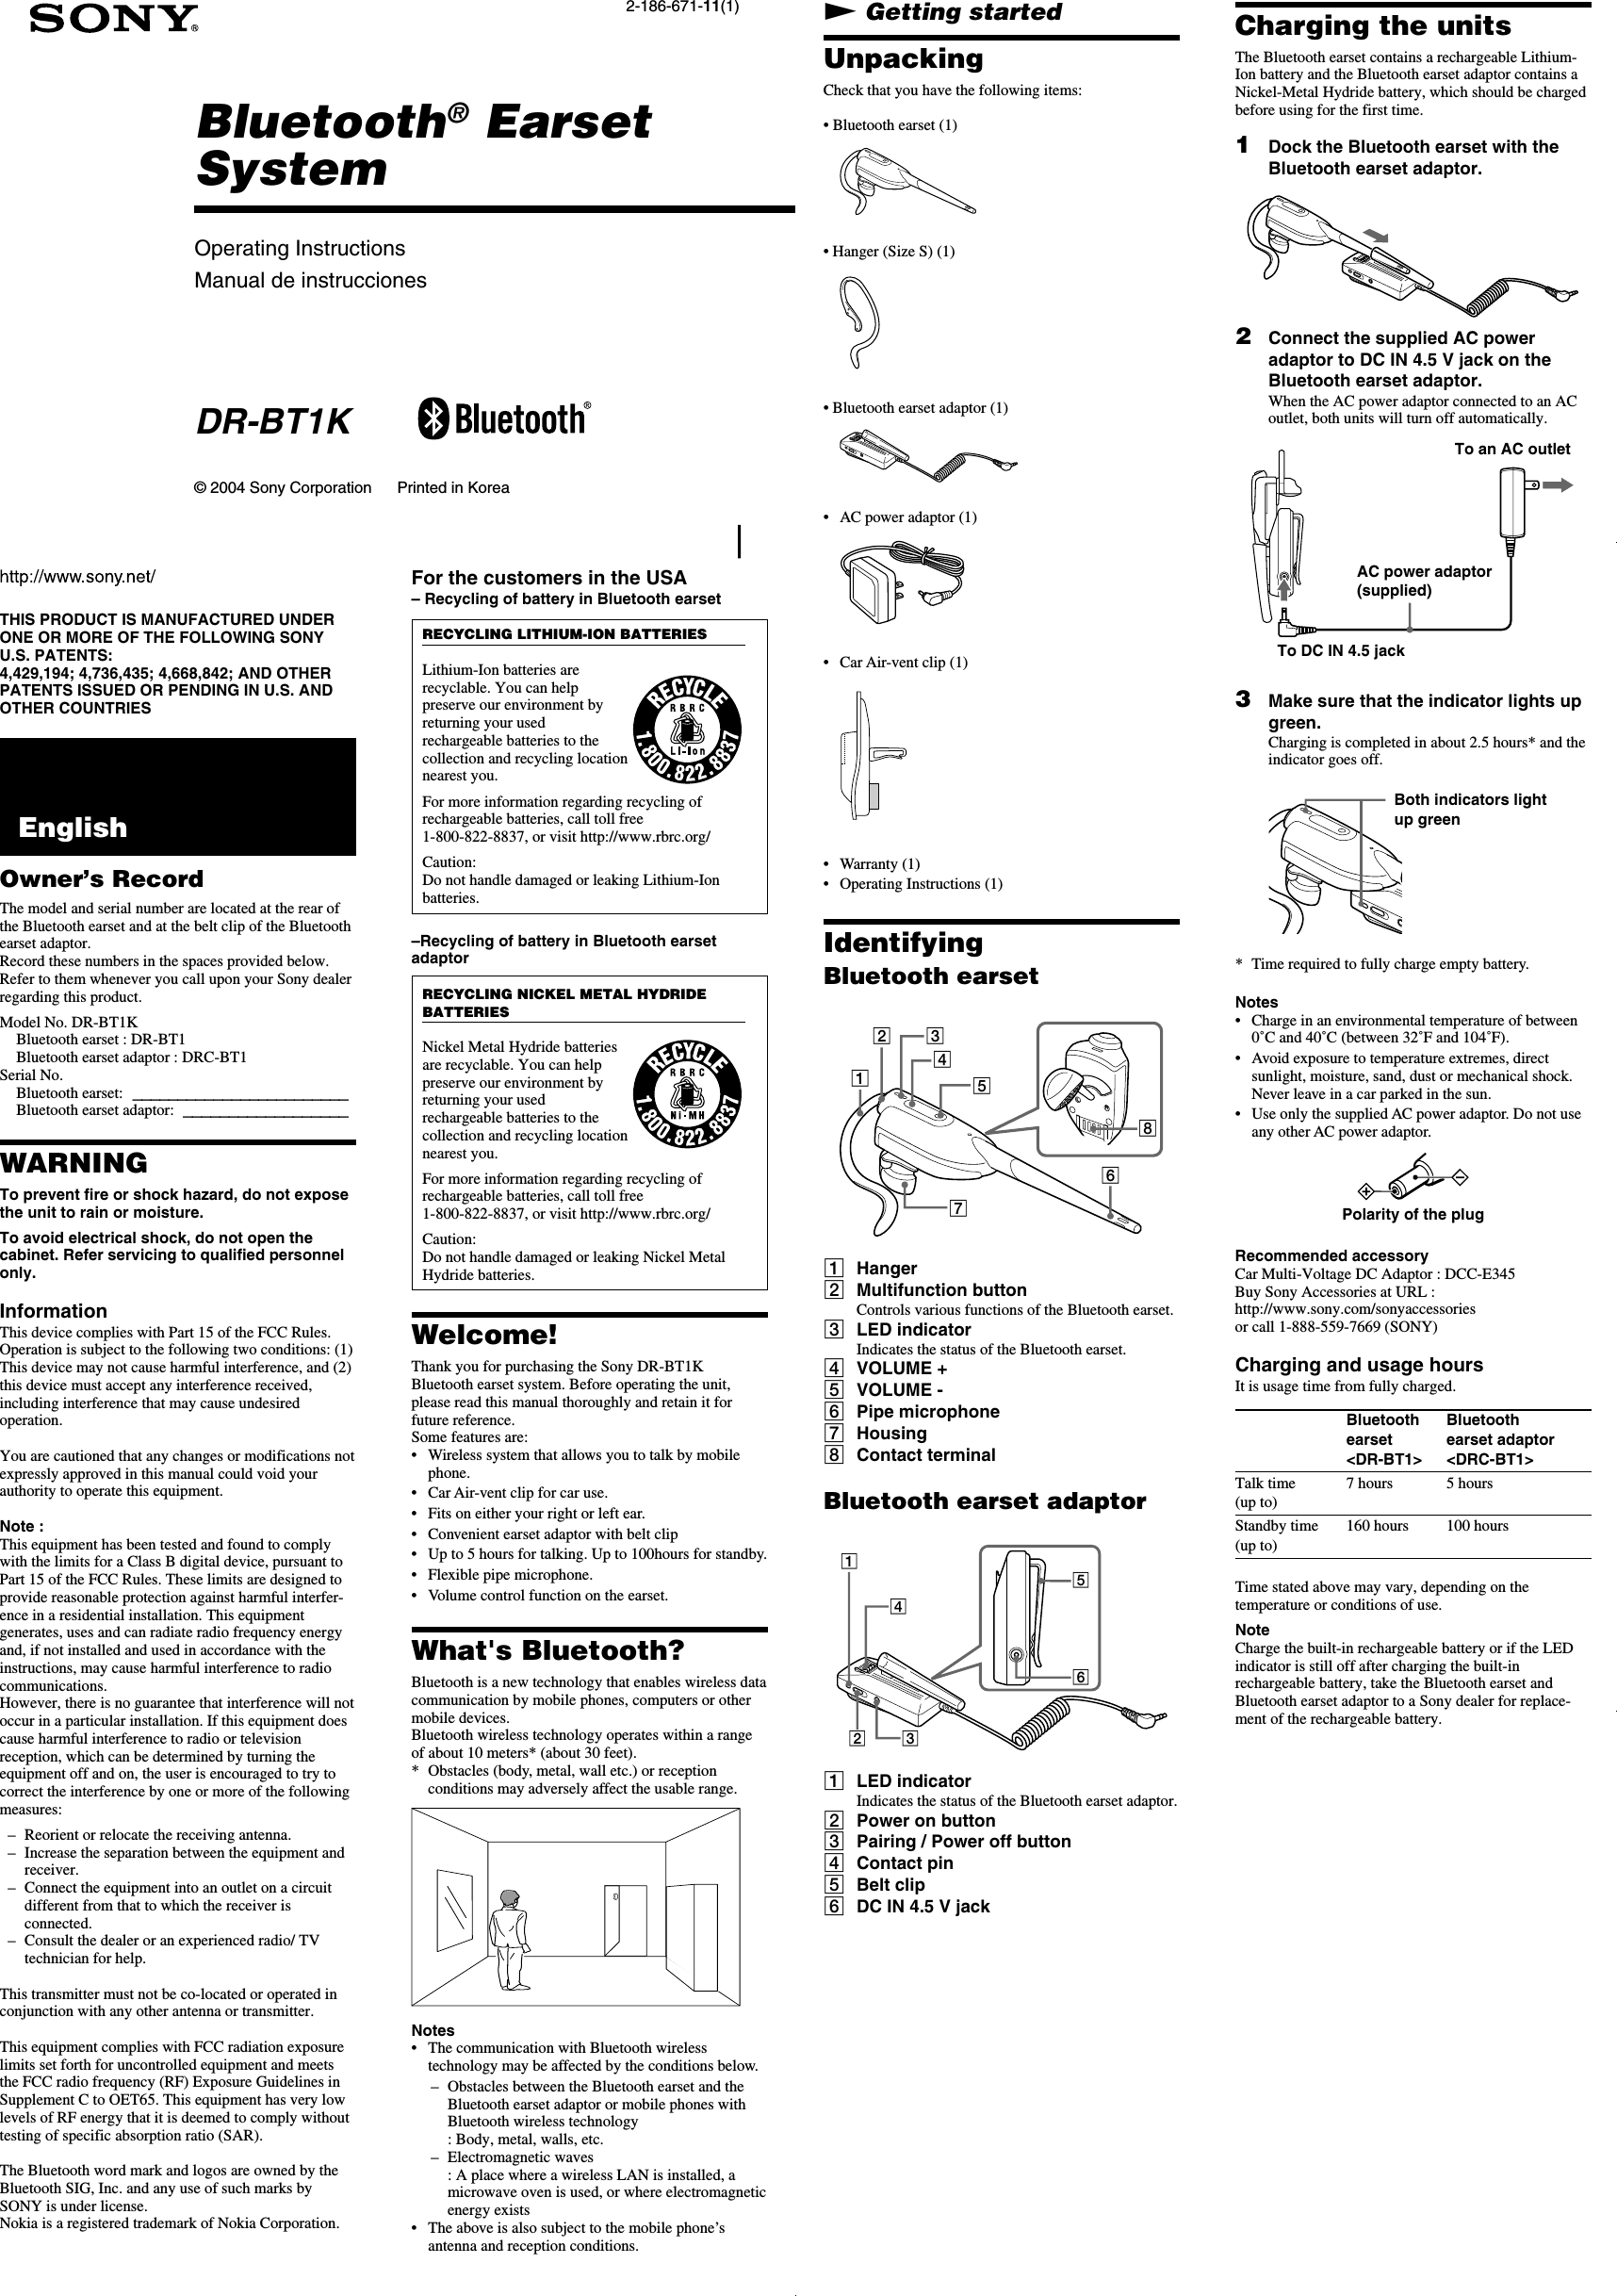 Operating InstructionsManual de instruccionesBluetooth® EarsetSystem2-186-671-11(1)© 2004 Sony Corporation     Printed in KoreaDR-BT1KTHIS PRODUCT IS MANUFACTURED UNDERONE OR MORE OF THE FOLLOWING SONYU.S. PATENTS:4,429,194; 4,736,435; 4,668,842; AND OTHERPATENTS ISSUED OR PENDING IN U.S. ANDOTHER COUNTRIES  EnglishOwner’s RecordThe model and serial number are located at the rear ofthe Bluetooth earset and at the belt clip of the Bluetoothearset adaptor.Record these numbers in the spaces provided below.Refer to them whenever you call upon your Sony dealerregarding this product.Model No. DR-BT1KBluetooth earset : DR-BT1Bluetooth earset adaptor : DRC-BT1Serial No.Bluetooth earset:------------------------Bluetooth earset adaptor:------------------WARNINGTo prevent fire or shock hazard, do not exposethe unit to rain or moisture.To avoid electrical shock, do not open thecabinet. Refer servicing to qualified personnelonly.InformationThis device complies with Part 15 of the FCC Rules.Operation is subject to the following two conditions: (1)This device may not cause harmful interference, and (2)this device must accept any interference received,including interference that may cause undesiredoperation.You are cautioned that any changes or modifications notexpressly approved in this manual could void yourauthority to operate this equipment.Note :This equipment has been tested and found to complywith the limits for a Class B digital device, pursuant toPart 15 of the FCC Rules. These limits are designed toprovide reasonable protection against harmful interfer-ence in a residential installation. This equipmentgenerates, uses and can radiate radio frequency energyand, if not installed and used in accordance with theinstructions, may cause harmful interference to radiocommunications.However, there is no guarantee that interference will notoccur in a particular installation. If this equipment doescause harmful interference to radio or televisionreception, which can be determined by turning theequipment off and on, the user is encouraged to try tocorrect the interference by one or more of the followingmeasures:–Reorient or relocate the receiving antenna.–Increase the separation between the equipment andreceiver.– Connect the equipment into an outlet on a circuitdifferent from that to which the receiver isconnected.–Consult the dealer or an experienced radio/ TVtechnician for help.This transmitter must not be co-located or operated inconjunction with any other antenna or transmitter.This equipment complies with FCC radiation exposurelimits set forth for uncontrolled equipment and meetsthe FCC radio frequency (RF) Exposure Guidelines inSupplement C to OET65. This equipment has very lowlevels of RF energy that it is deemed to comply withouttesting of specific absorption ratio (SAR).The Bluetooth word mark and logos are owned by theBluetooth SIG, Inc. and any use of such marks bySONY is under license.Nokia is a registered trademark of Nokia Corporation.N Getting startedUnpackingCheck that you have the following items:• Bluetooth earset (1)• Hanger (Size S) (1)R• Bluetooth earset adaptor (1)•AC power adaptor (1)•Car Air-vent clip (1)•Warranty (1)•Operating Instructions (1)IdentifyingBluetooth earsetRL123456781Hanger2Multifunction buttonControls various functions of the Bluetooth earset.3LED indicatorIndicates the status of the Bluetooth earset.4VOLUME +5VOLUME -6Pipe microphone7Housing8Contact terminalBluetooth earset adaptor1345621LED indicatorIndicates the status of the Bluetooth earset adaptor.2Power on button3Pairing / Power off button4Contact pin5Belt clip6DC IN 4.5 V jackCharging the unitsThe Bluetooth earset contains a rechargeable Lithium-Ion battery and the Bluetooth earset adaptor contains aNickel-Metal Hydride battery, which should be chargedbefore using for the first time.1Dock the Bluetooth earset with theBluetooth earset adaptor.2Connect the supplied AC poweradaptor to DC IN 4.5 V jack on theBluetooth earset adaptor.When the AC power adaptor connected to an ACoutlet, both units will turn off automatically.3Make sure that the indicator lights upgreen.Charging is completed in about 2.5 hours* and theindicator goes off.*Time required to fully charge empty battery.Notes•Charge in an environmental temperature of between0˚C and 40˚C (between 32˚F and 104˚F).•Avoid exposure to temperature extremes, directsunlight, moisture, sand, dust or mechanical shock.Never leave in a car parked in the sun.•Use only the supplied AC power adaptor. Do not useany other AC power adaptor.Polarity of the plugRecommended accessoryCar Multi-Voltage DC Adaptor : DCC-E345Buy Sony Accessories at URL :http://www.sony.com/sonyaccessoriesor call 1-888-559-7669 (SONY)Charging and usage hoursIt is usage time from fully charged.Bluetooth Bluetoothearset earset adaptor&lt;DR-BT1&gt; &lt;DRC-BT1&gt;Talk time 7 hours 5 hours(up to)Standby time 160 hours 100 hours(up to)Time stated above may vary, depending on thetemperature or conditions of use.NoteCharge the built-in rechargeable battery or if the LEDindicator is still off after charging the built-inrechargeable battery, take the Bluetooth earset andBluetooth earset adaptor to a Sony dealer for replace-ment of the rechargeable battery.To DC IN 4.5 jackAC power adaptor(supplied)To an AC outletBoth indicators lightup greenFor the customers in the USA– Recycling of battery in Bluetooth earsetRECYCLING LITHIUM-ION BATTERIESLithium-Ion batteries arerecyclable. You can helppreserve our environment byreturning your usedrechargeable batteries to thecollection and recycling locationnearest you.For more information regarding recycling ofrechargeable batteries, call toll free1-800-822-8837, or visit http://www.rbrc.org/Caution:Do not handle damaged or leaking Lithium-Ionbatteries.–Recycling of battery in Bluetooth earsetadaptorRECYCLING NICKEL METAL HYDRIDEBATTERIESNickel Metal Hydride batteriesare recyclable. You can helppreserve our environment byreturning your usedrechargeable batteries to thecollection and recycling locationnearest you.For more information regarding recycling ofrechargeable batteries, call toll free1-800-822-8837, or visit http://www.rbrc.org/Caution:Do not handle damaged or leaking Nickel MetalHydride batteries.Welcome!Thank you for purchasing the Sony DR-BT1KBluetooth earset system. Before operating the unit,please read this manual thoroughly and retain it forfuture reference.Some features are:•Wireless system that allows you to talk by mobilephone.•Car Air-vent clip for car use.•Fits on either your right or left ear.•Convenient earset adaptor with belt clip• Up to 5 hours for talking. Up to 100hours for standby.•Flexible pipe microphone.•Volume control function on the earset.What&apos;s Bluetooth?Bluetooth is a new technology that enables wireless datacommunication by mobile phones, computers or othermobile devices.Bluetooth wireless technology operates within a rangeof about 10 meters* (about 30 feet).*Obstacles (body, metal, wall etc.) or receptionconditions may adversely affect the usable range.Notes•The communication with Bluetooth wirelesstechnology may be affected by the conditions below.–Obstacles between the Bluetooth earset and theBluetooth earset adaptor or mobile phones withBluetooth wireless technology: Body, metal, walls, etc.–Electromagnetic waves: A place where a wireless LAN is installed, amicrowave oven is used, or where electromagneticenergy exists•The above is also subject to the mobile phone’santenna and reception conditions.